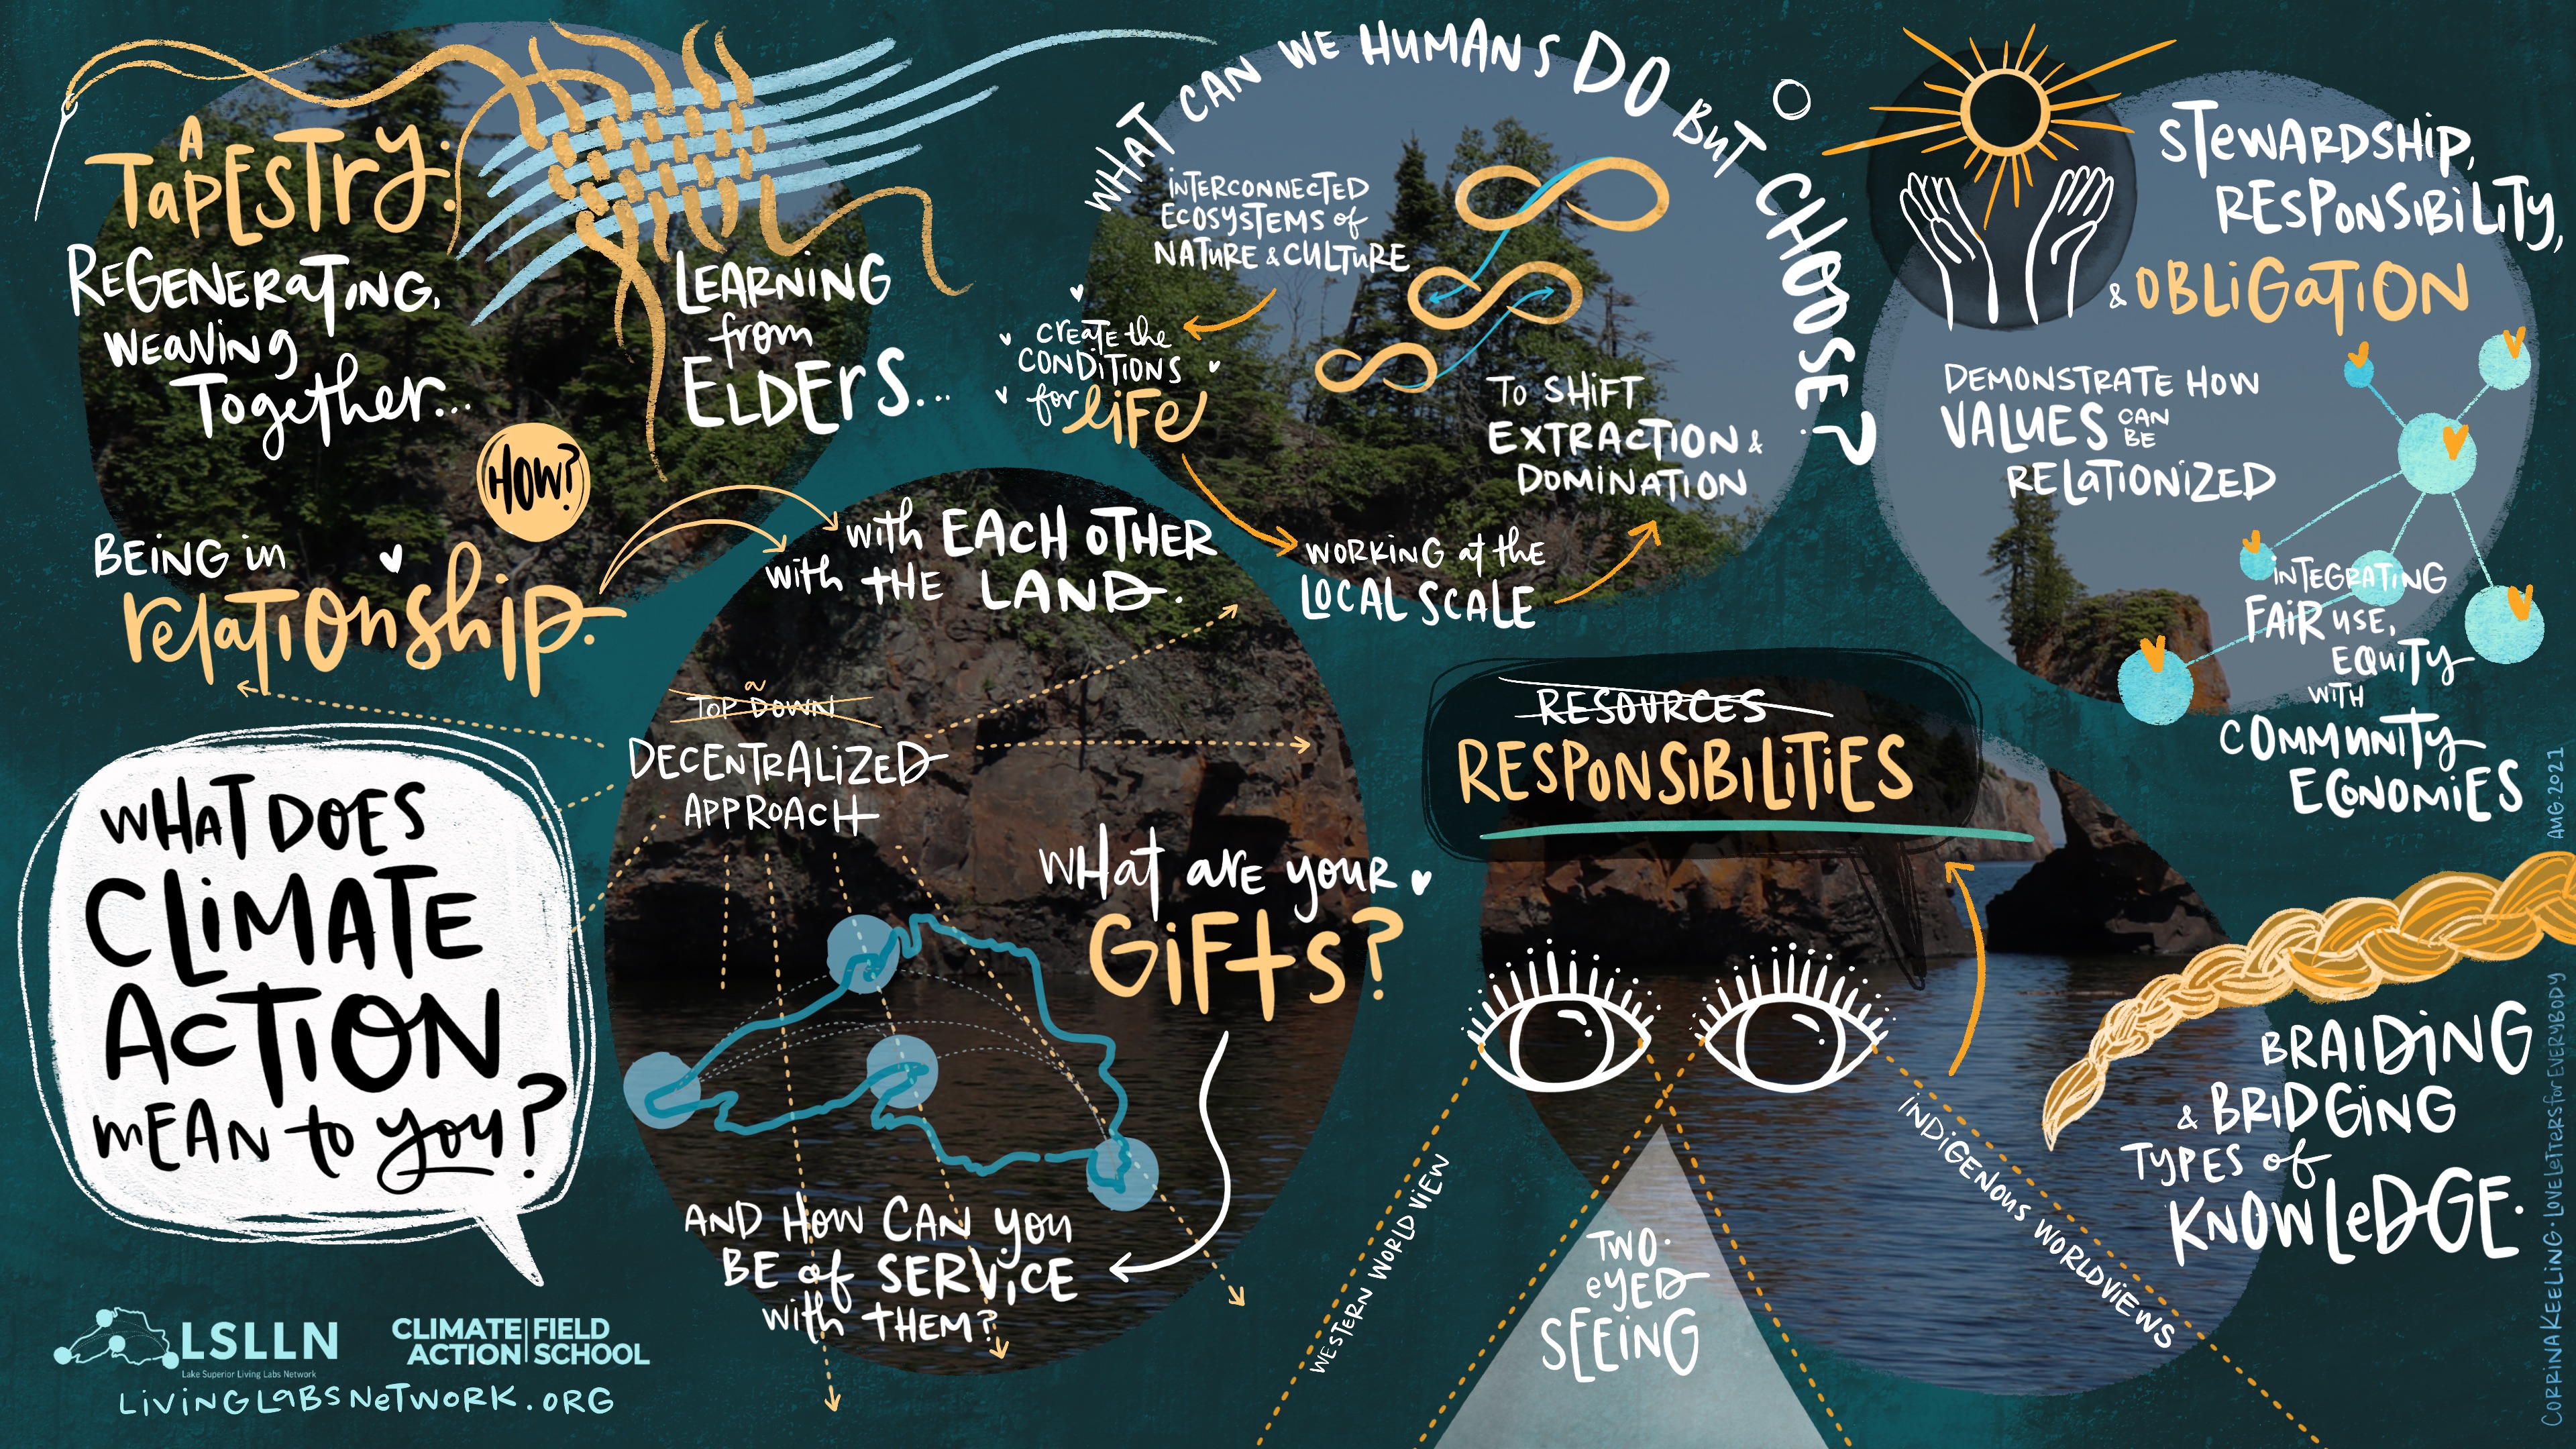 What is Climate Action: Graphic depicting various speakers response to climate action